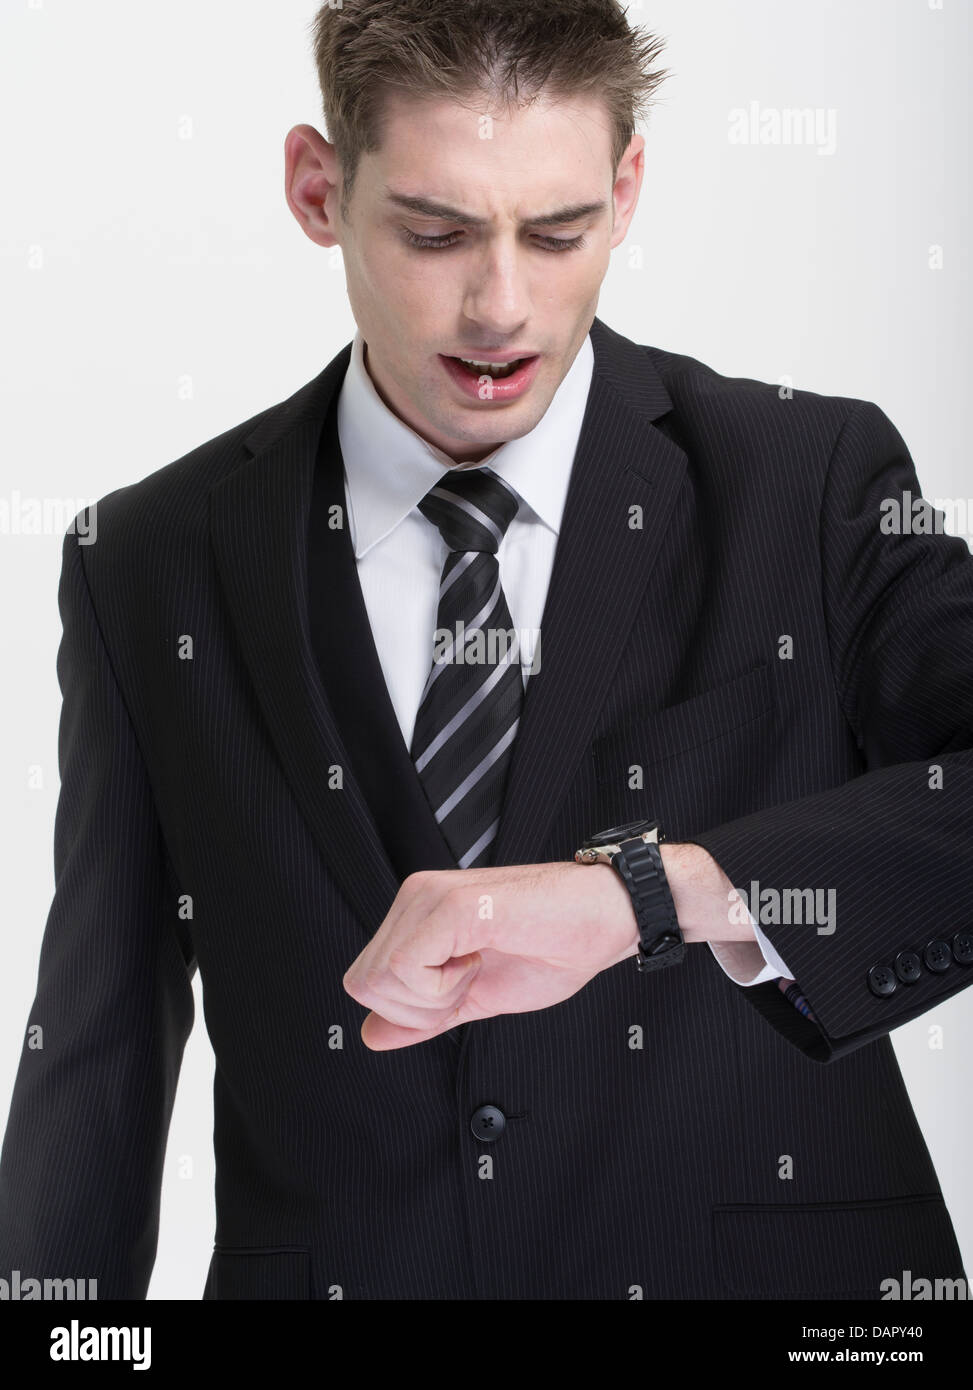 Businessman in suit and tie running late, checks his watch Stock Photo